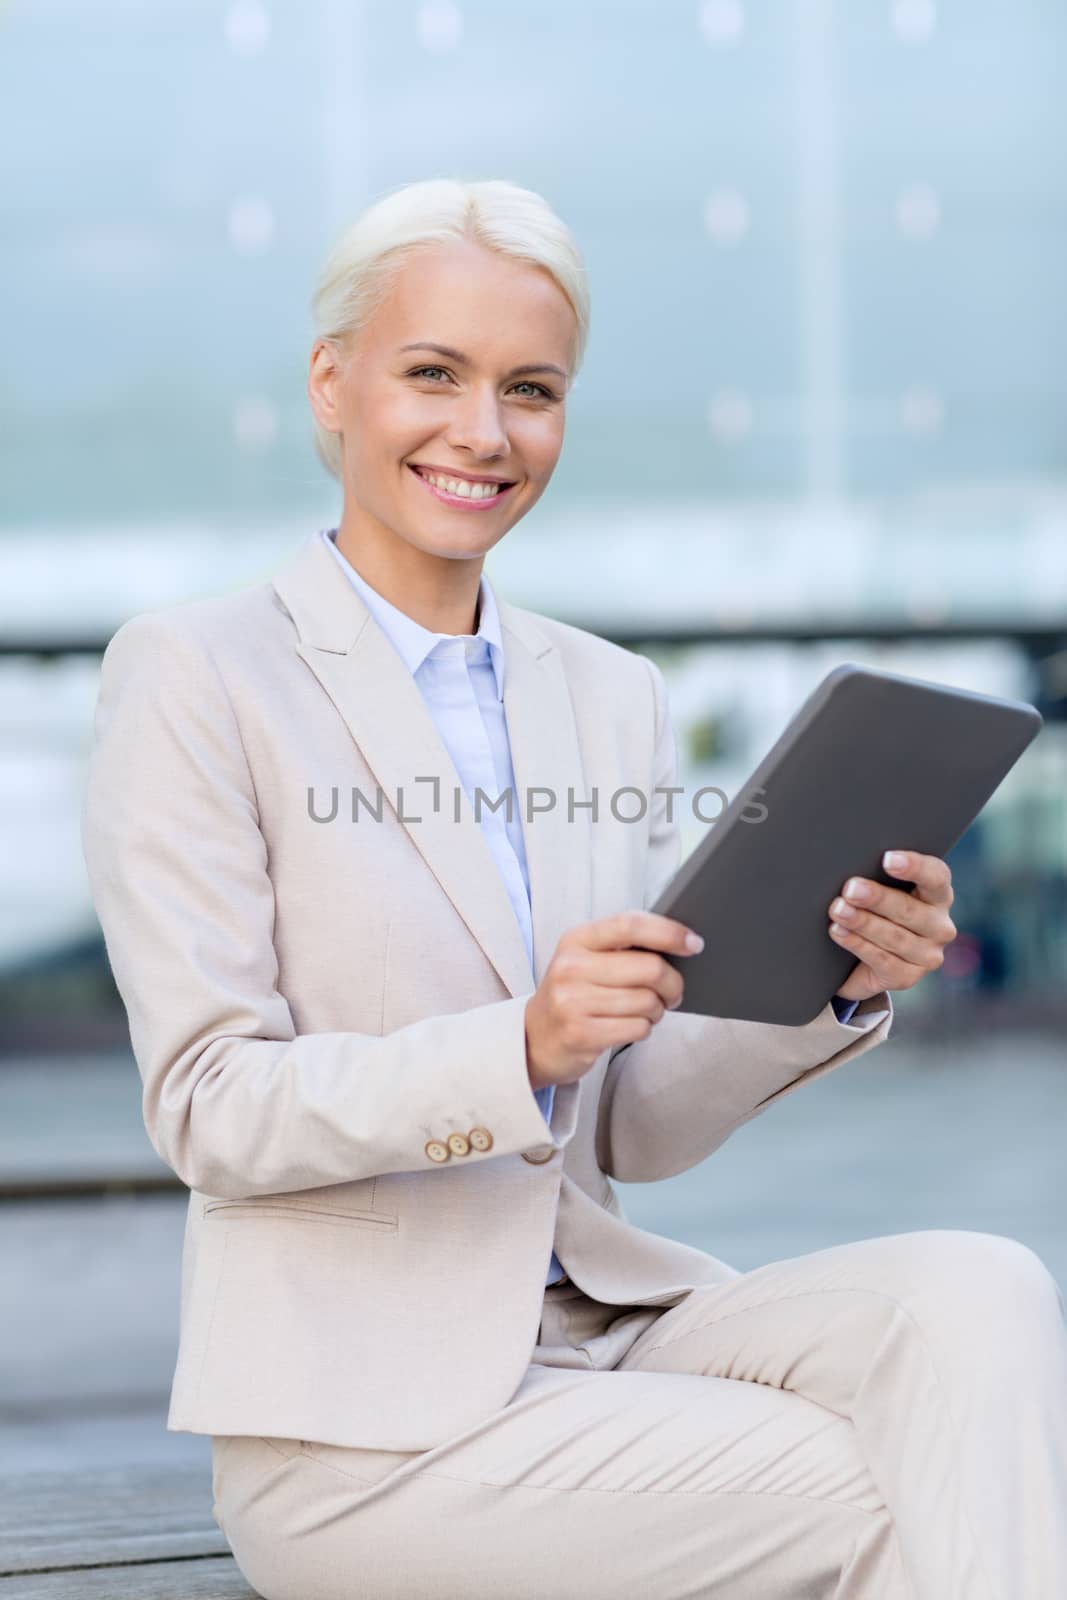 business, education, technology and people concept - smiling businesswoman working with tablet pc computer on city street